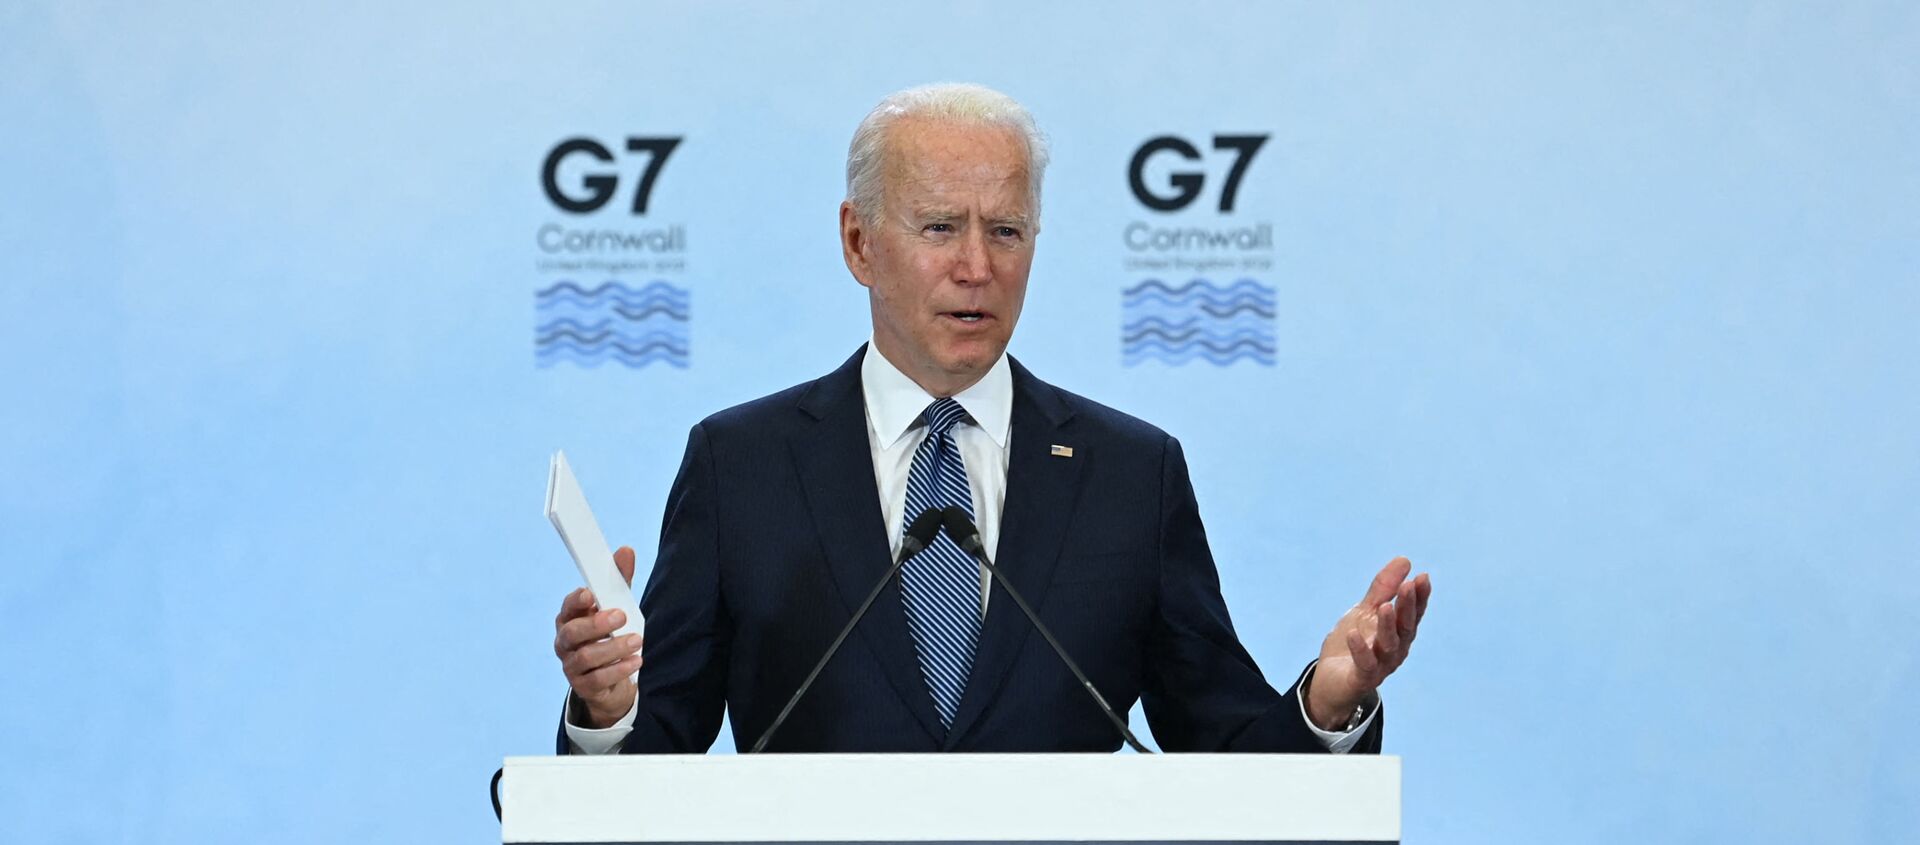 US President Joe Biden takes part in a press conference on the final day of the G7 summit at Cornwall Airport Newquay, near Newquay, Cornwall on June 13, 2021.  - Sputnik International, 1920